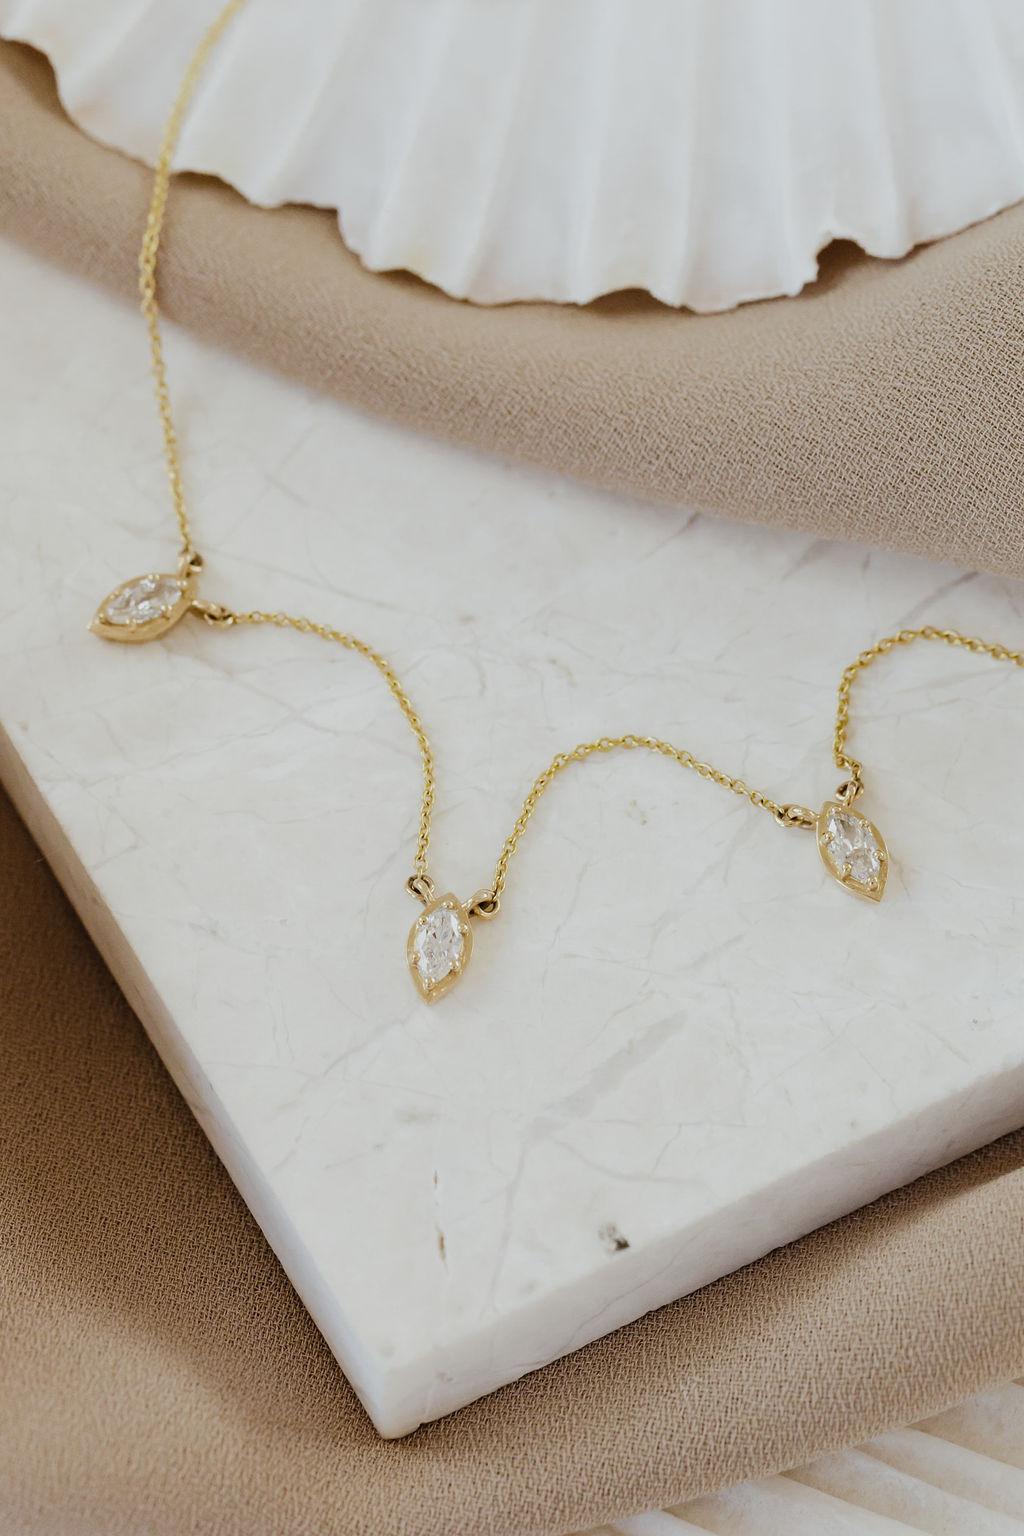 14K Yellow Gold Citrine Station Necklace